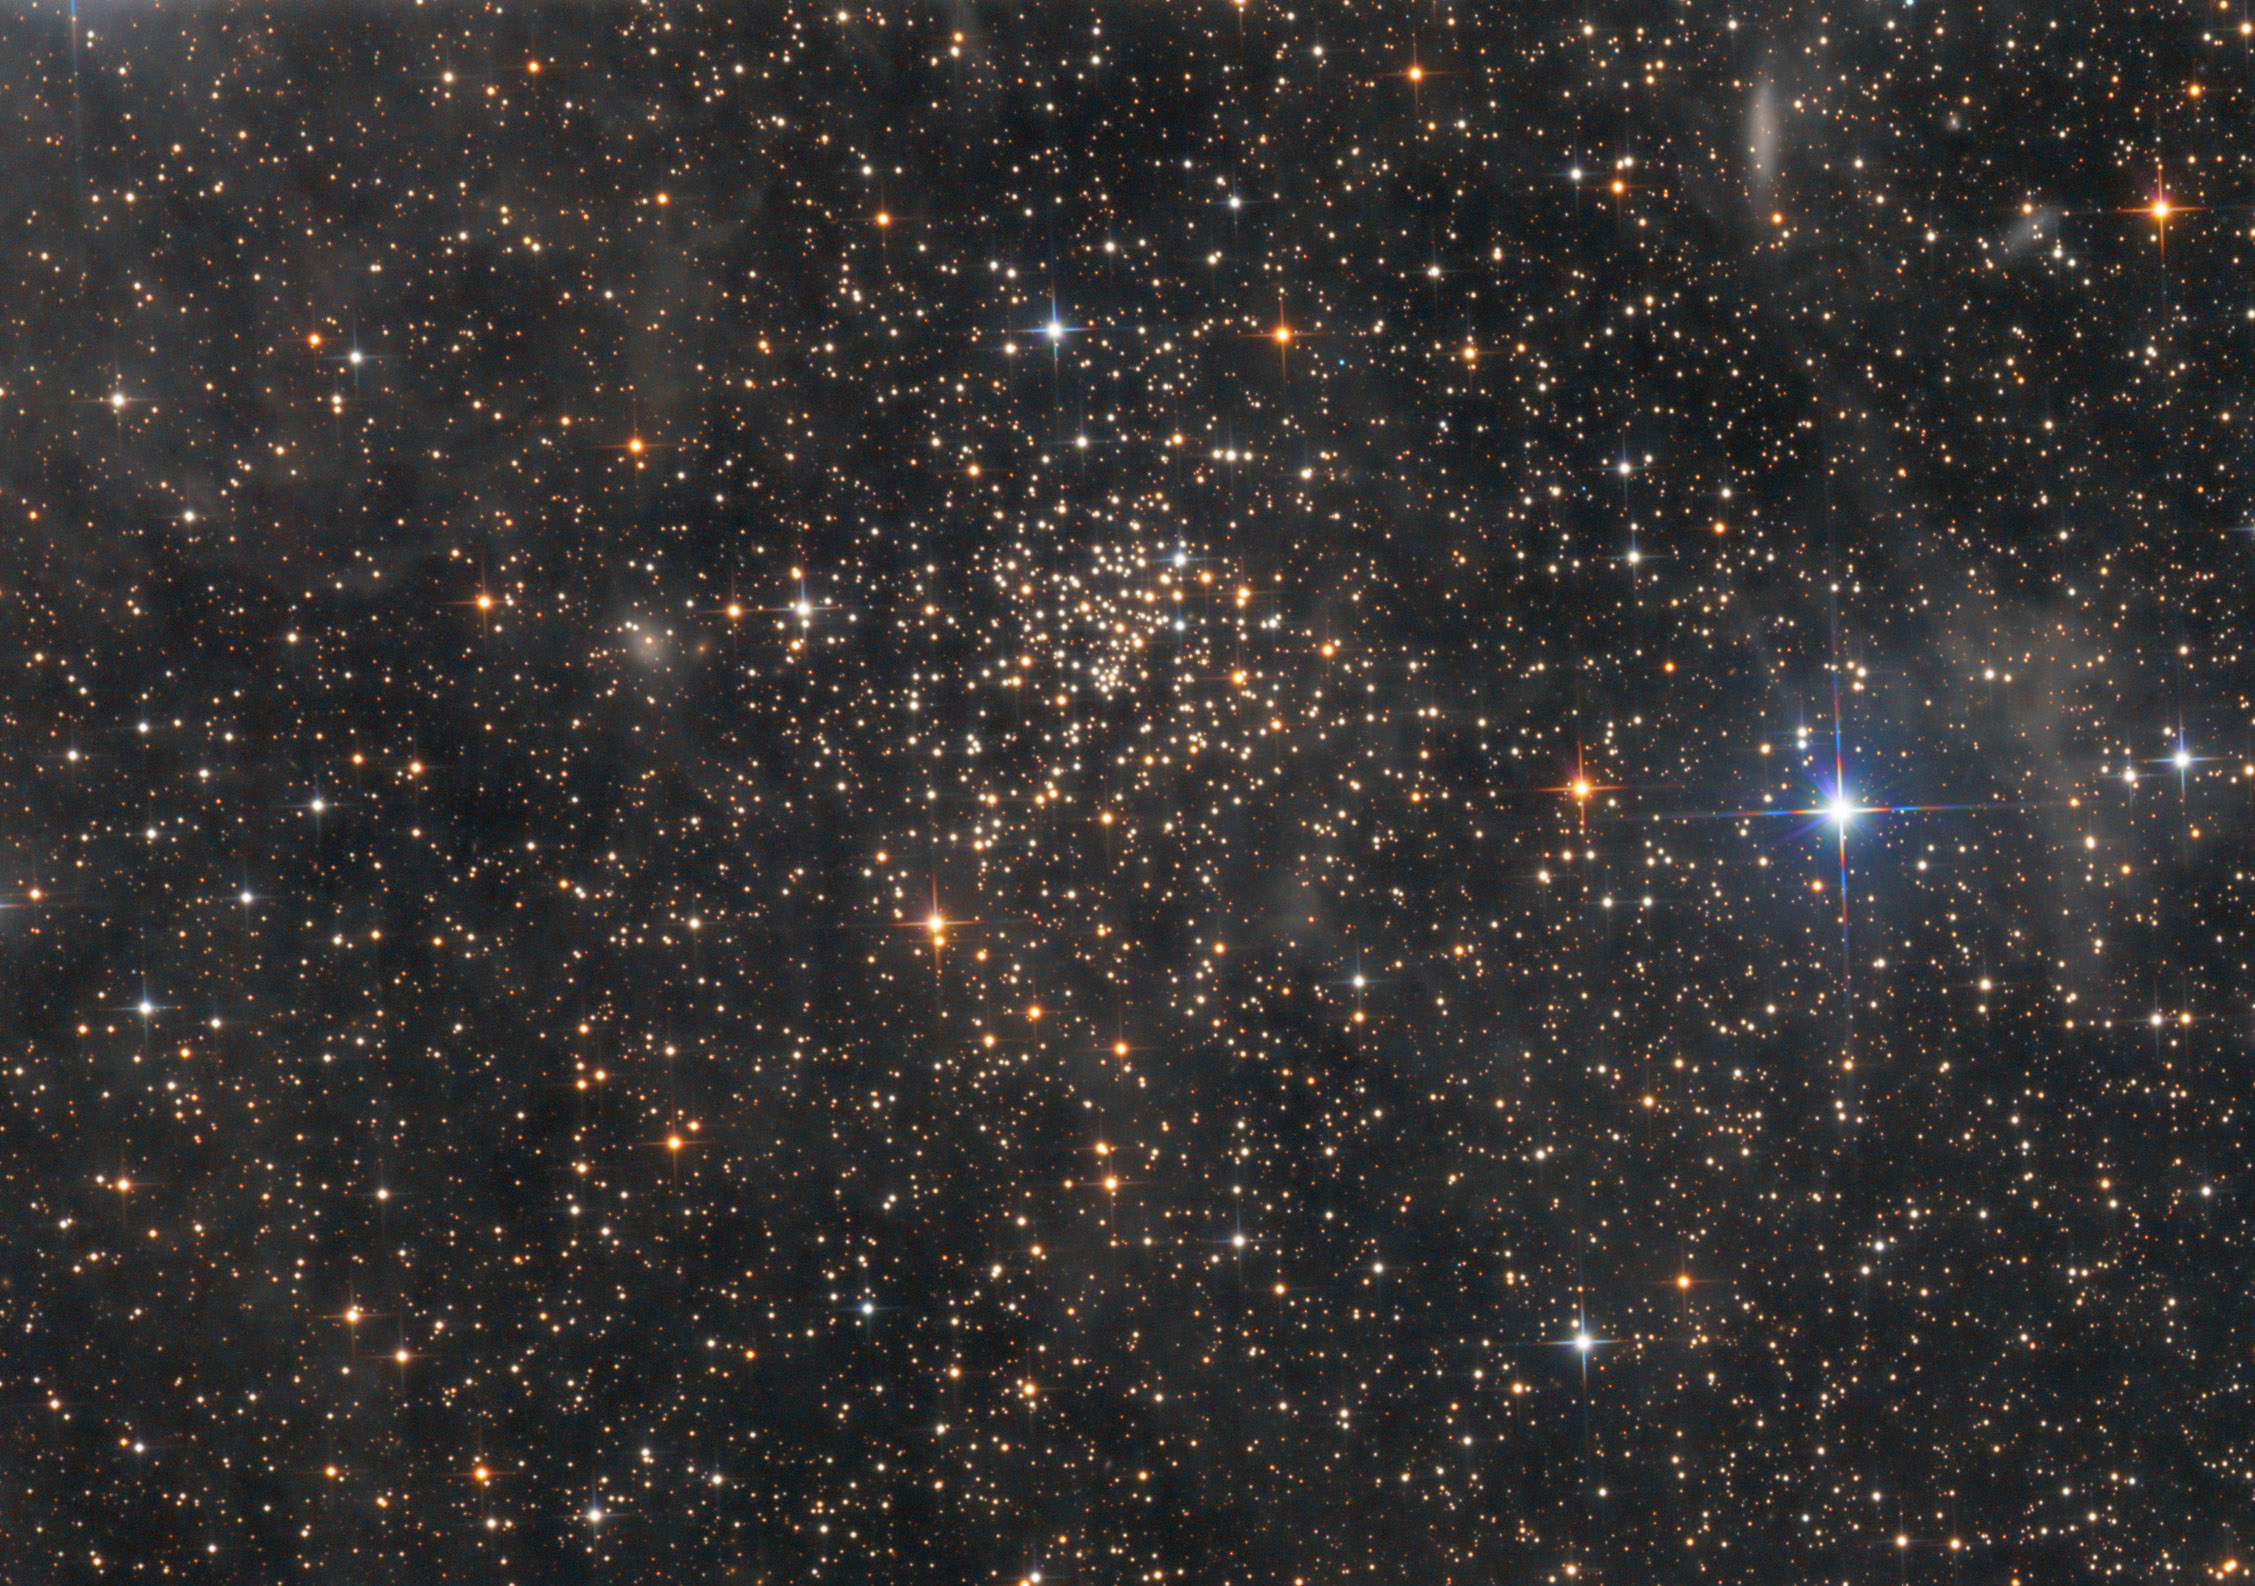 The Open Cluster NGC 6936